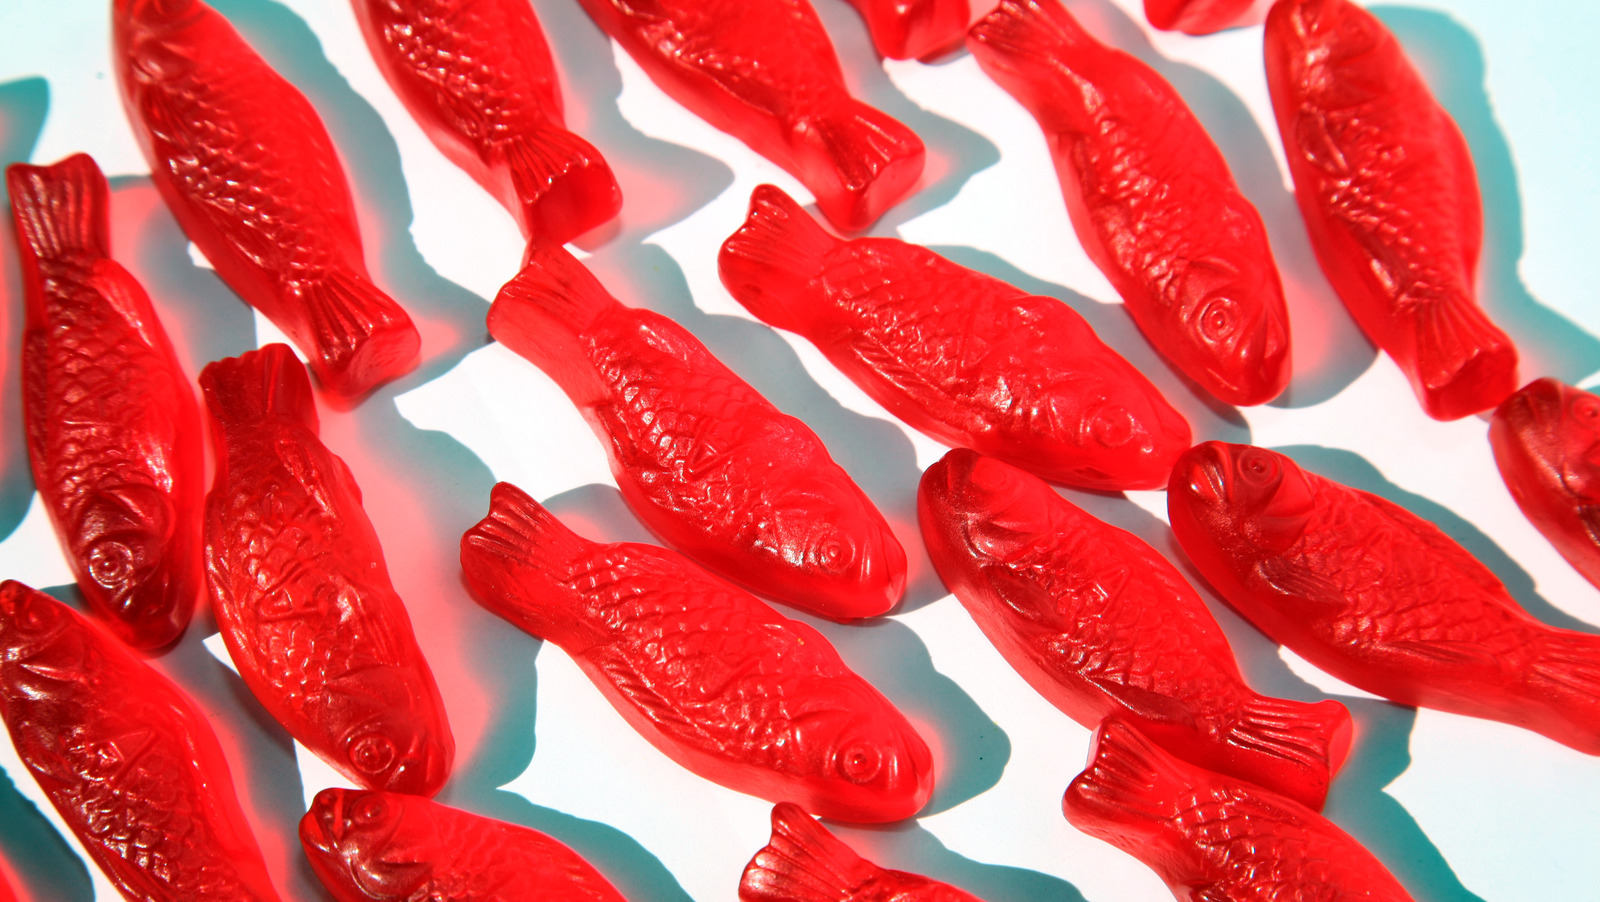 What Is The Actual Flavor Of Swedish Fish?